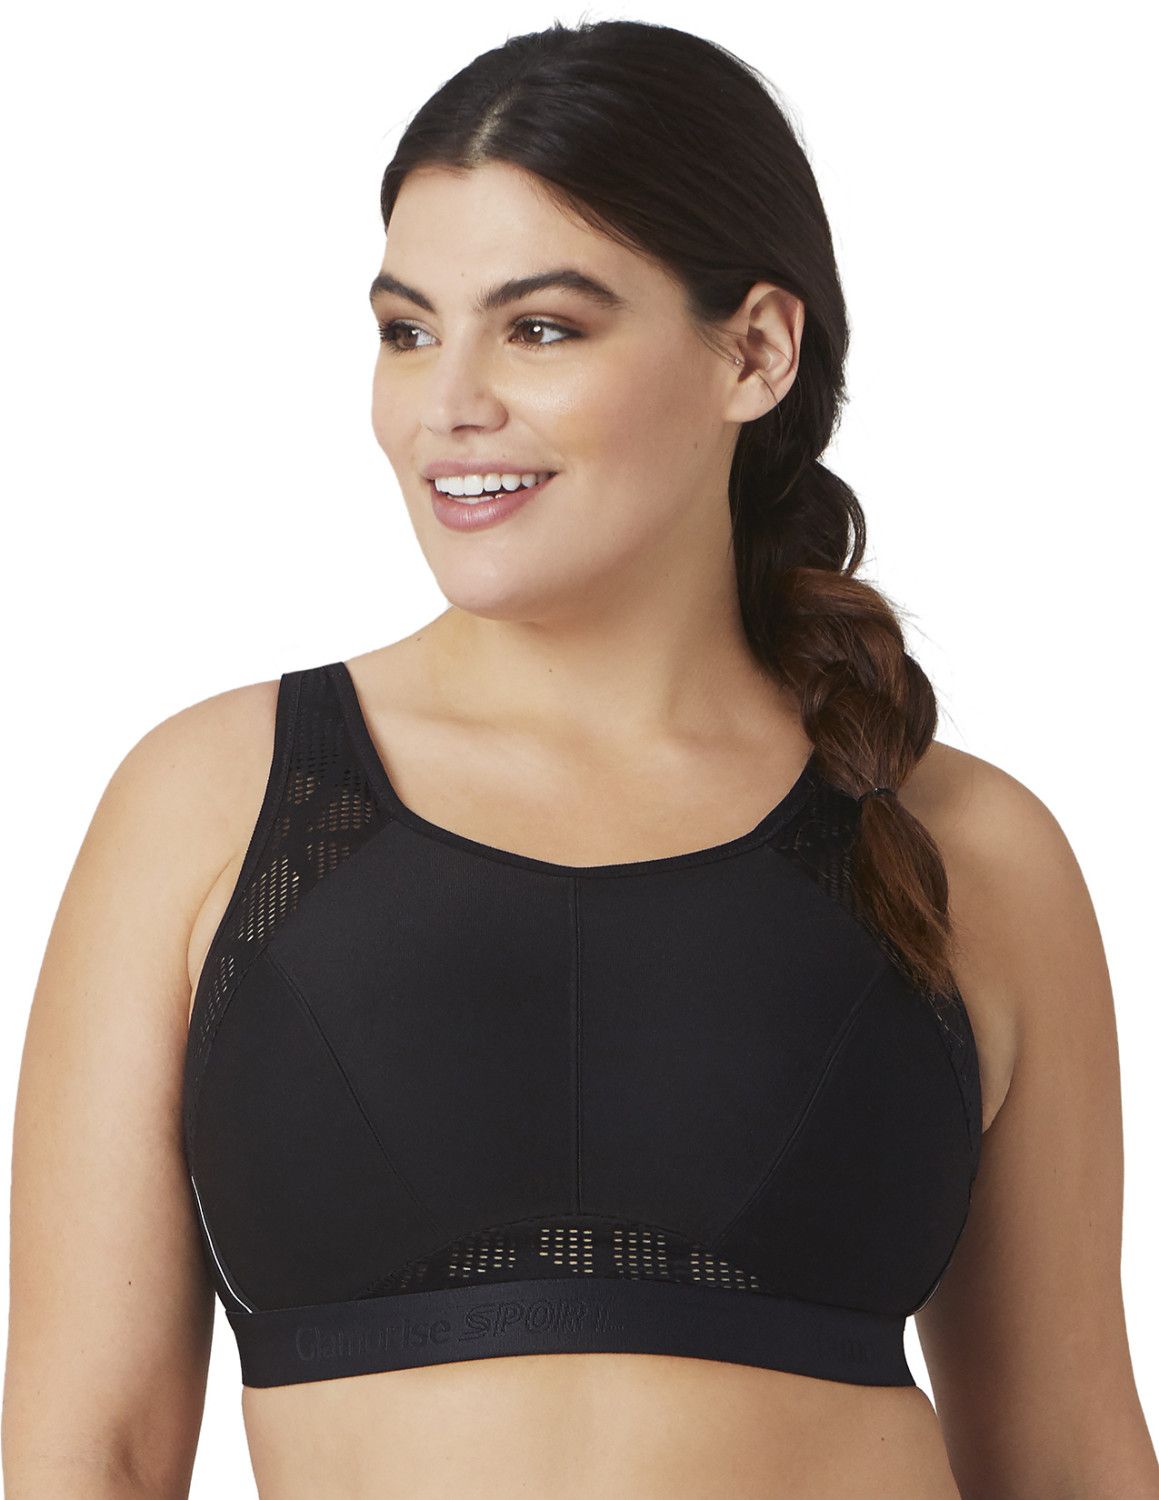 Review of the Glamorise Sport Elite Adjustable Wirefree Sports Bra